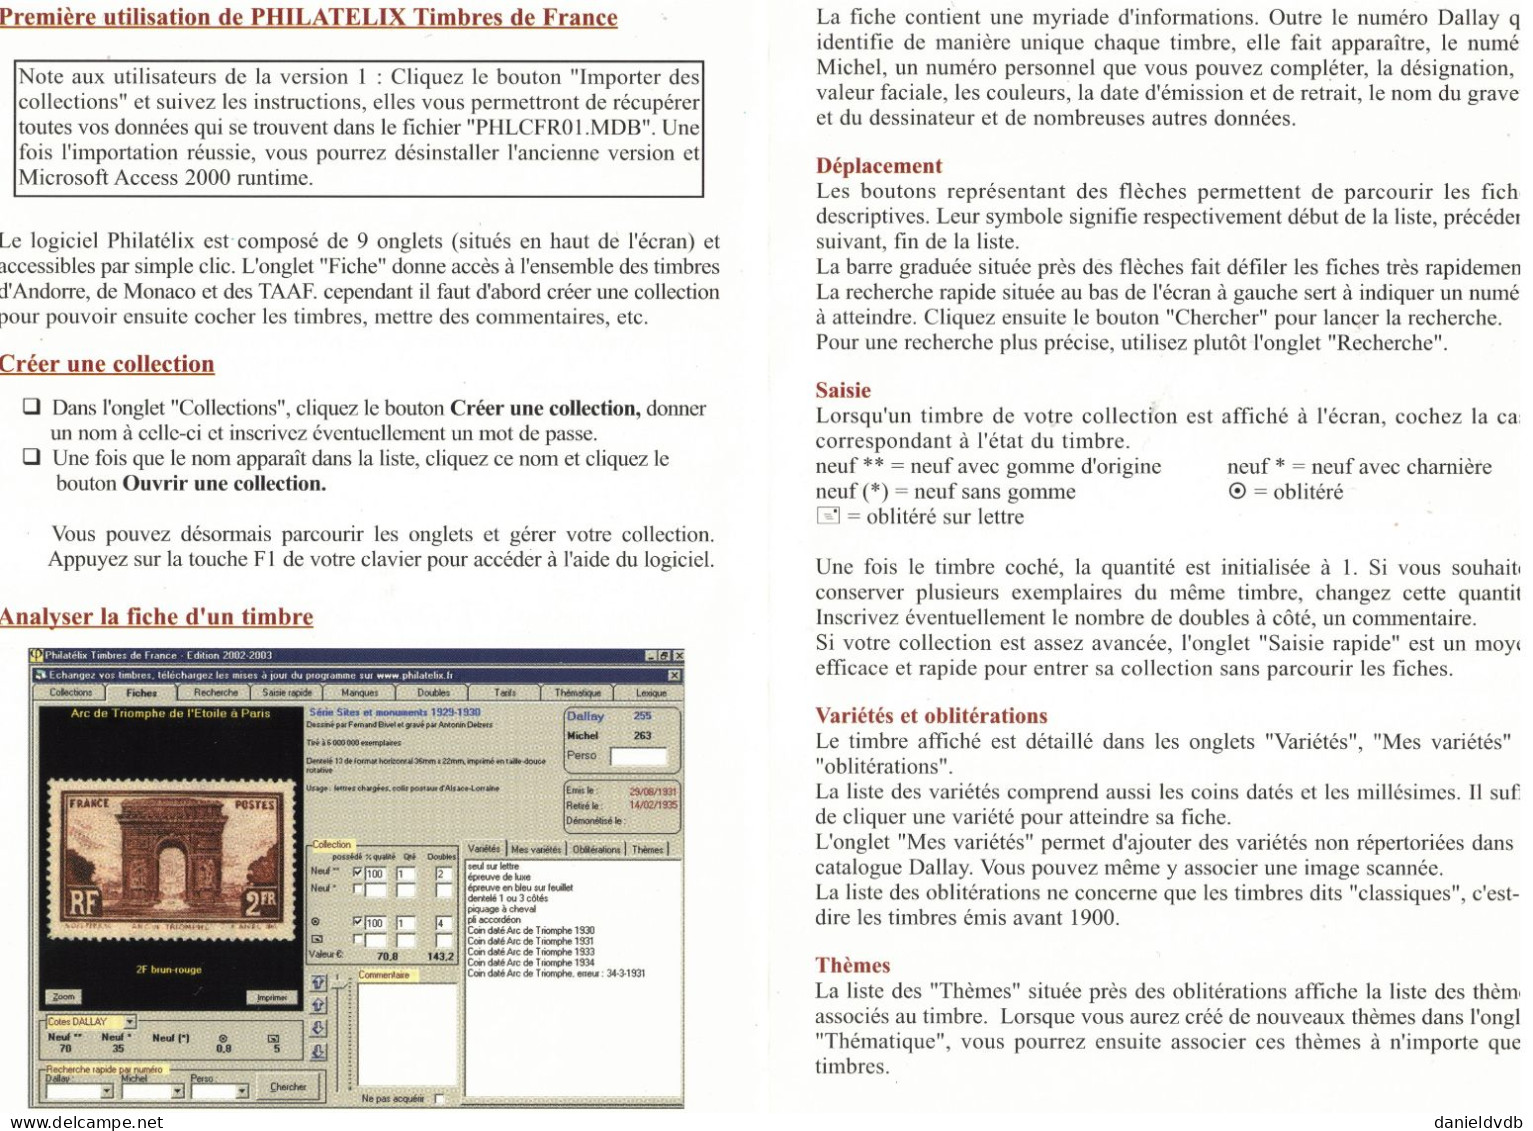 Timbres De FRANCE 1849 - 2001 Philatelix édition Dallay 2002-2003 1 CD-ROM - French